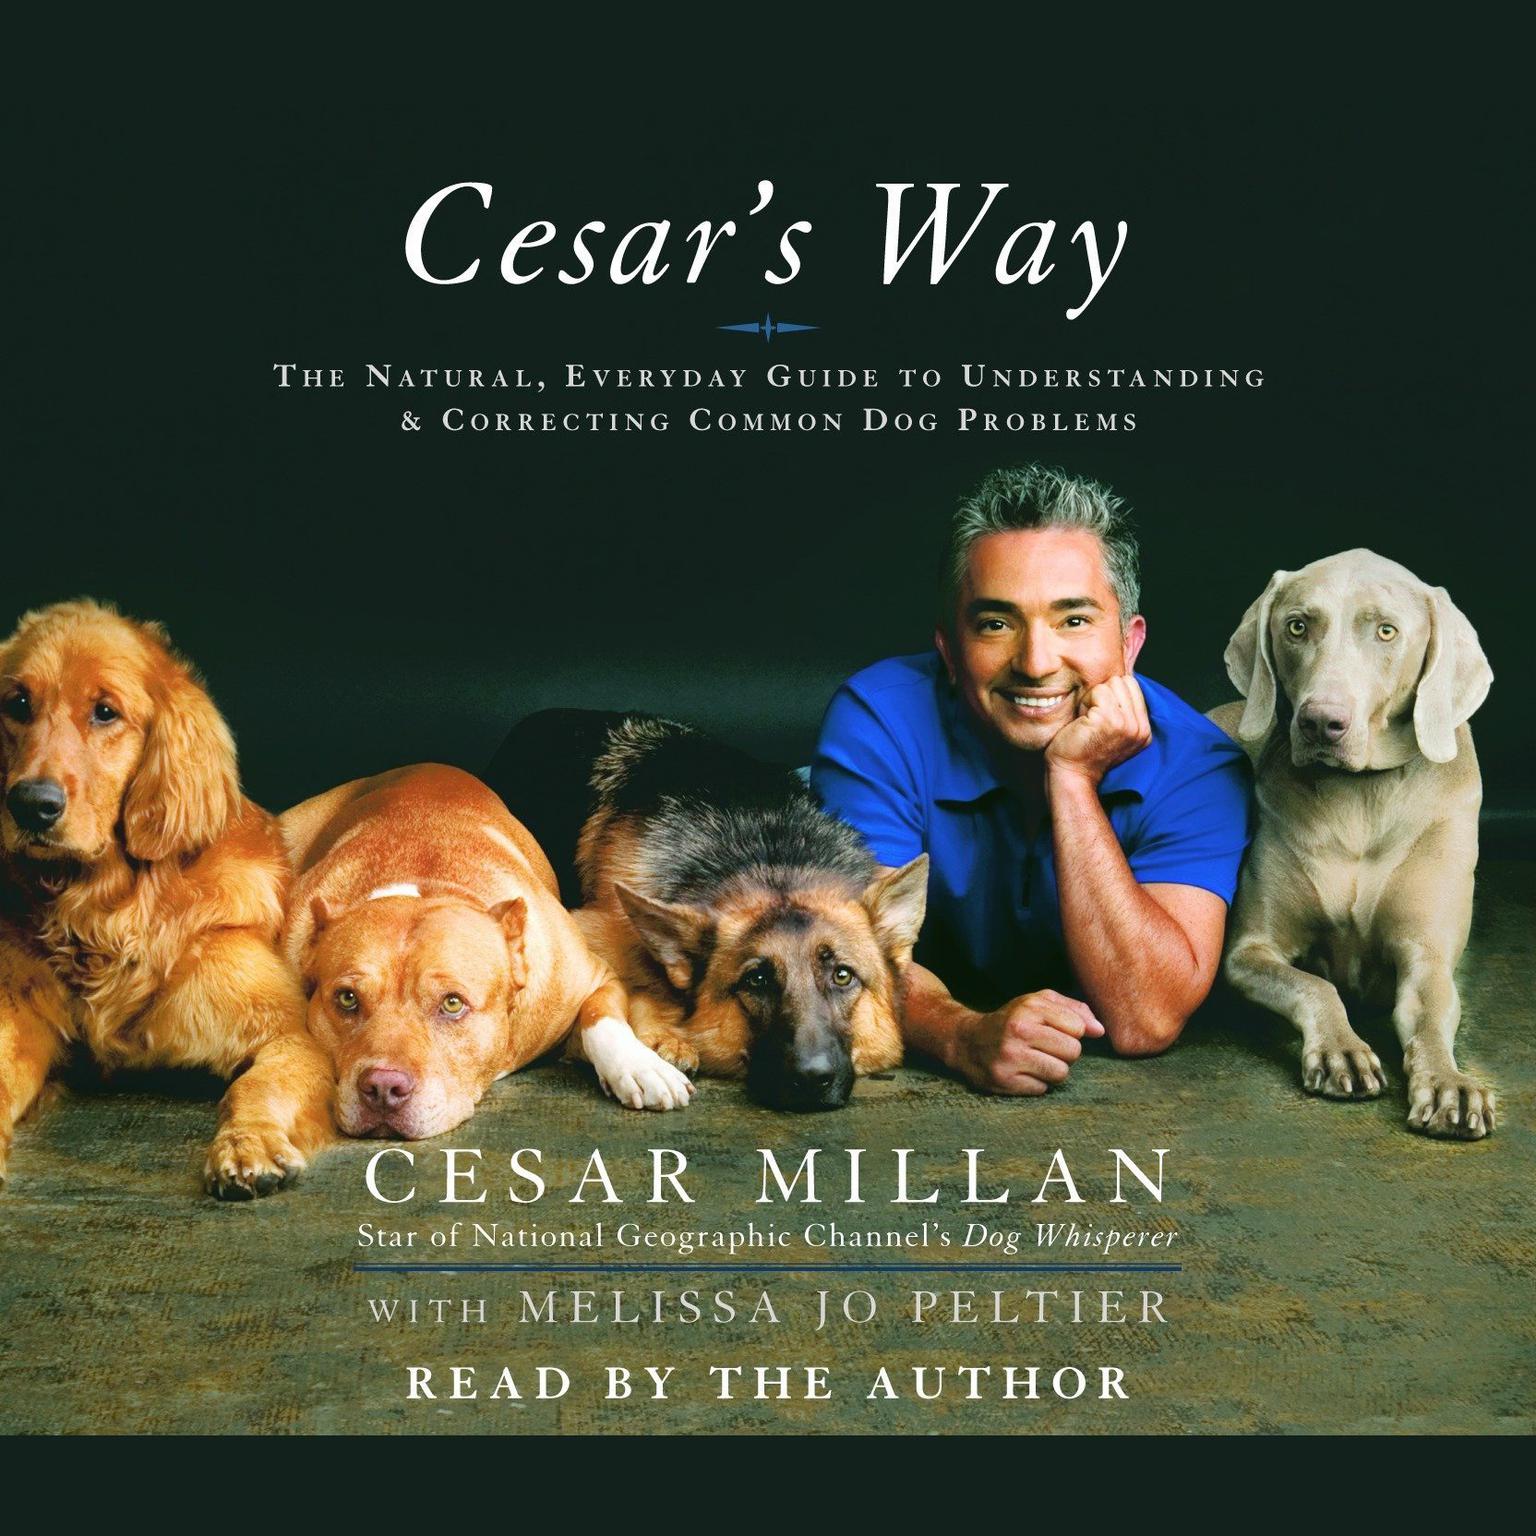 Cesars Way (Abridged): The Natural, Everyday Guide to Understanding and Correcting Common Dog Problems Audiobook, by Cesar Millan